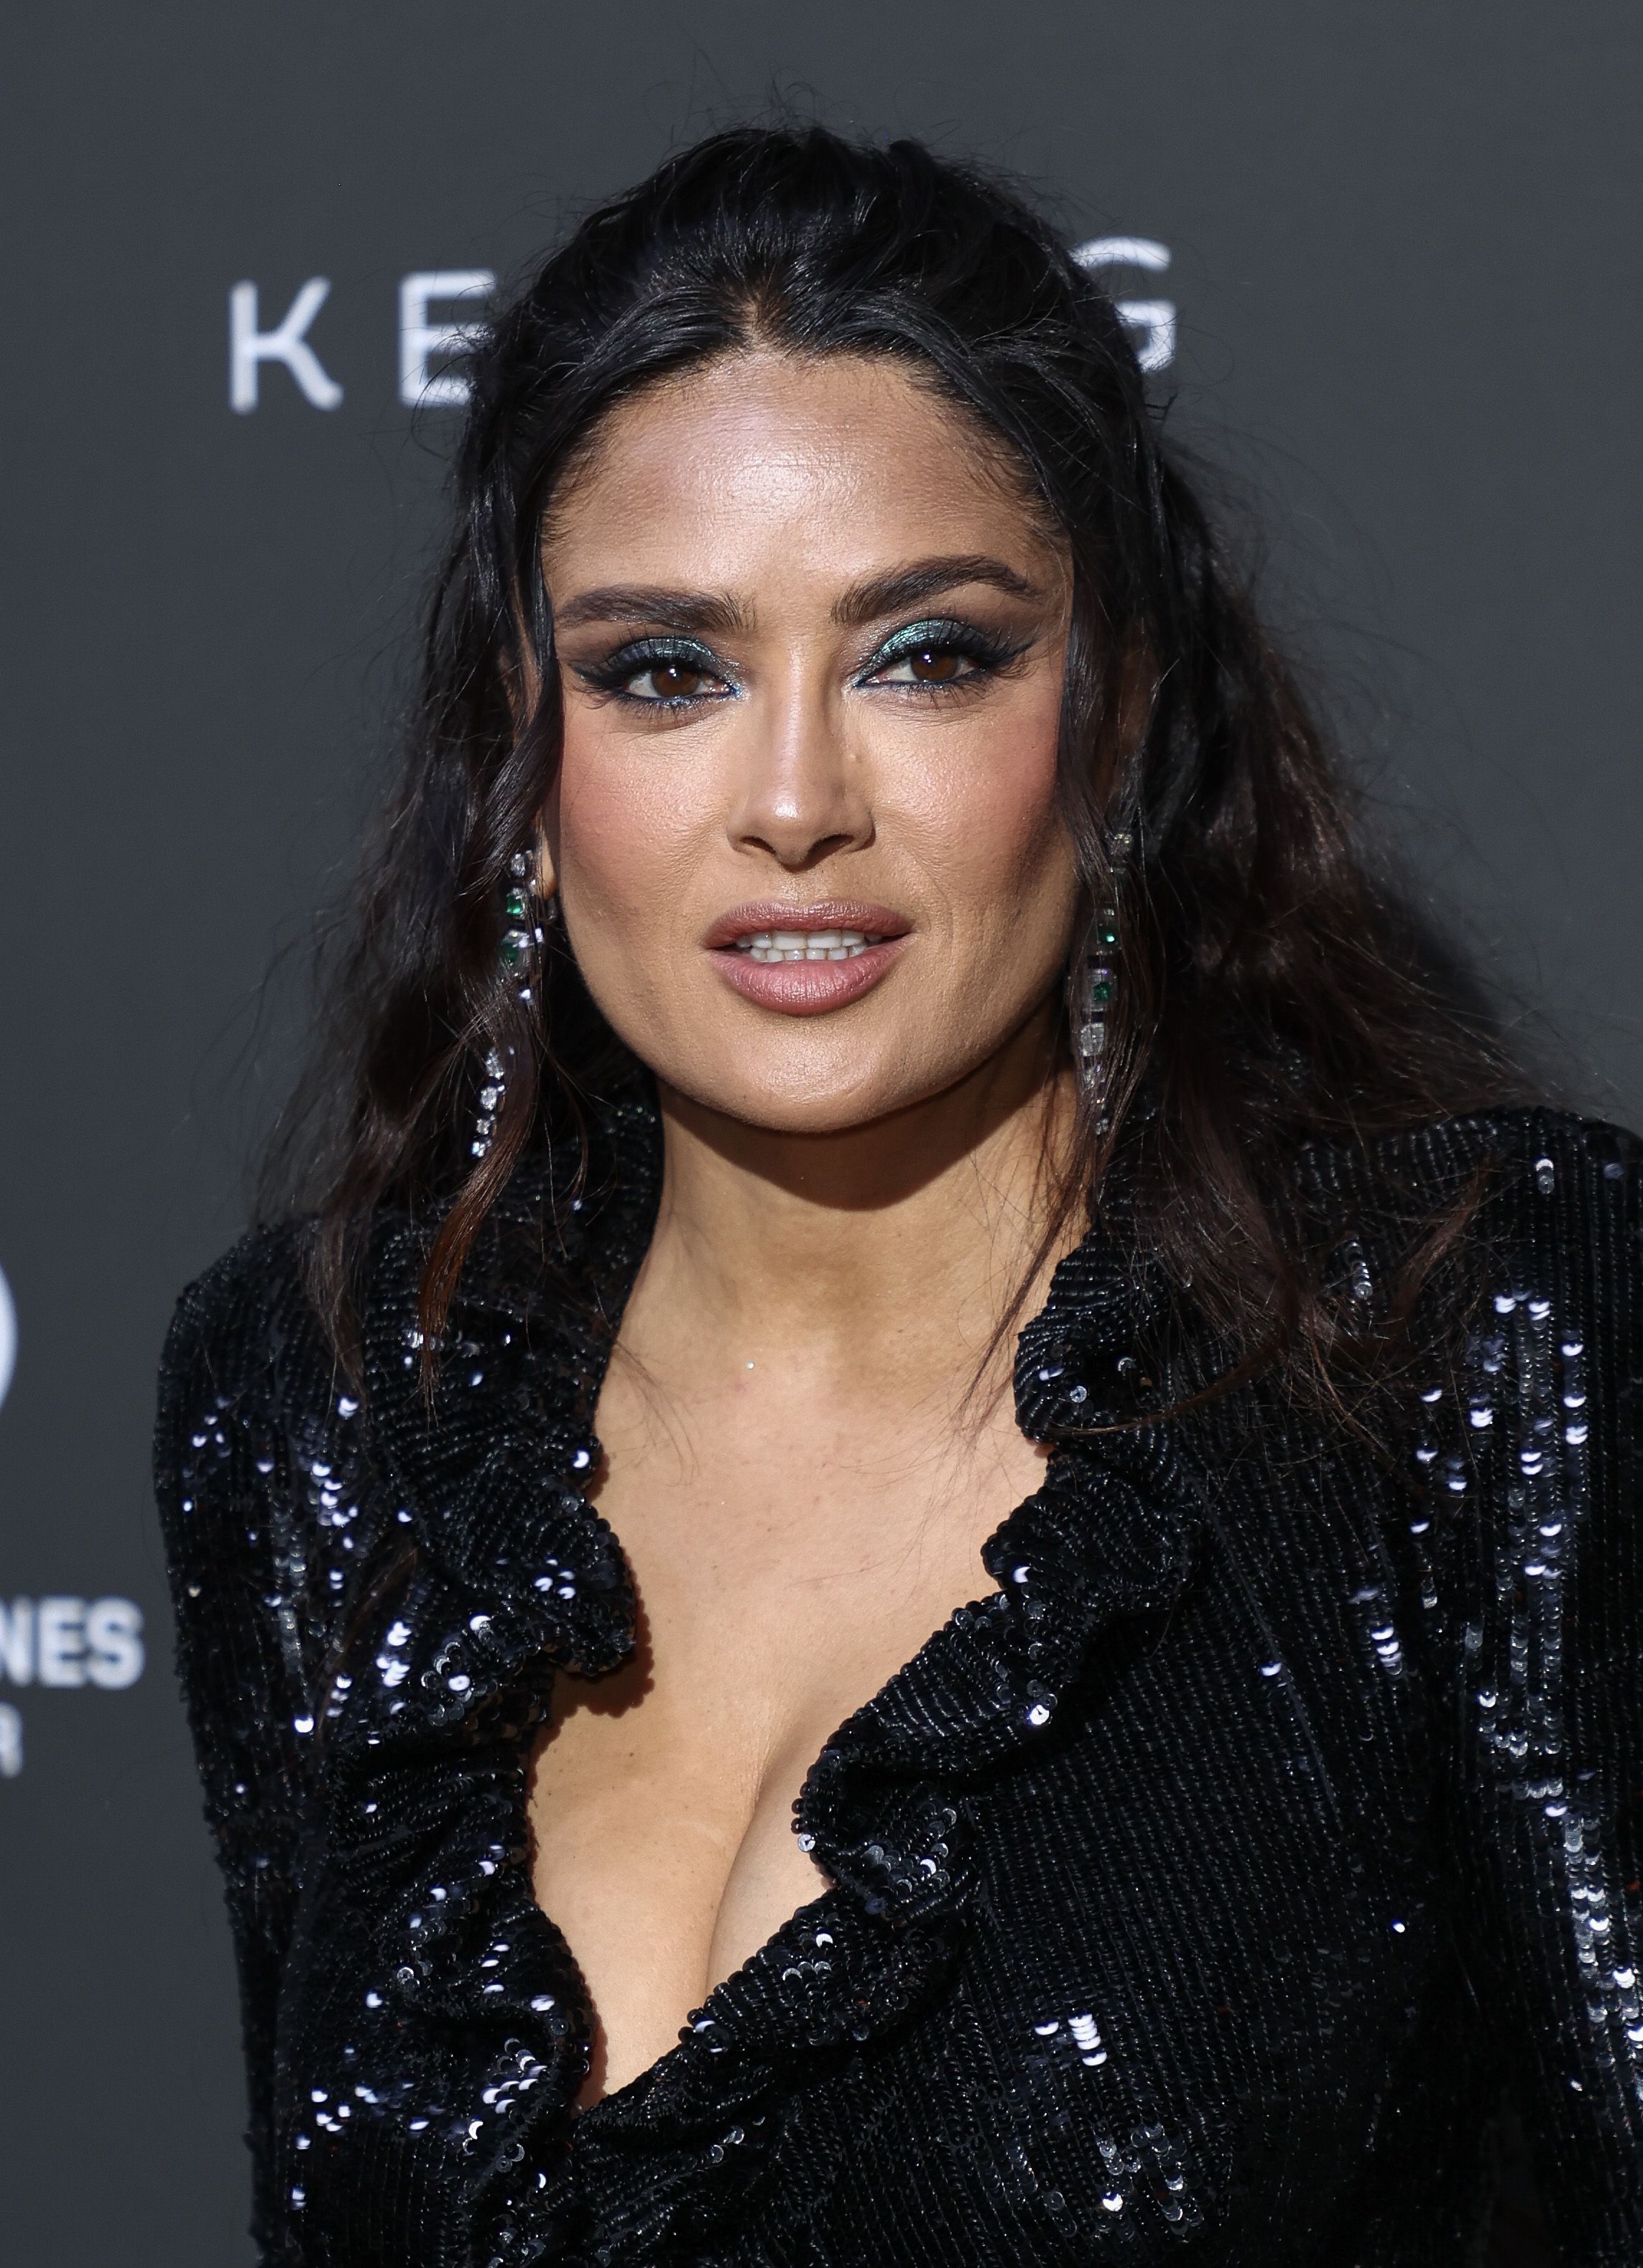 Salma Hayek, 56, Poses Nude, Showing Off Abs in Sauna image